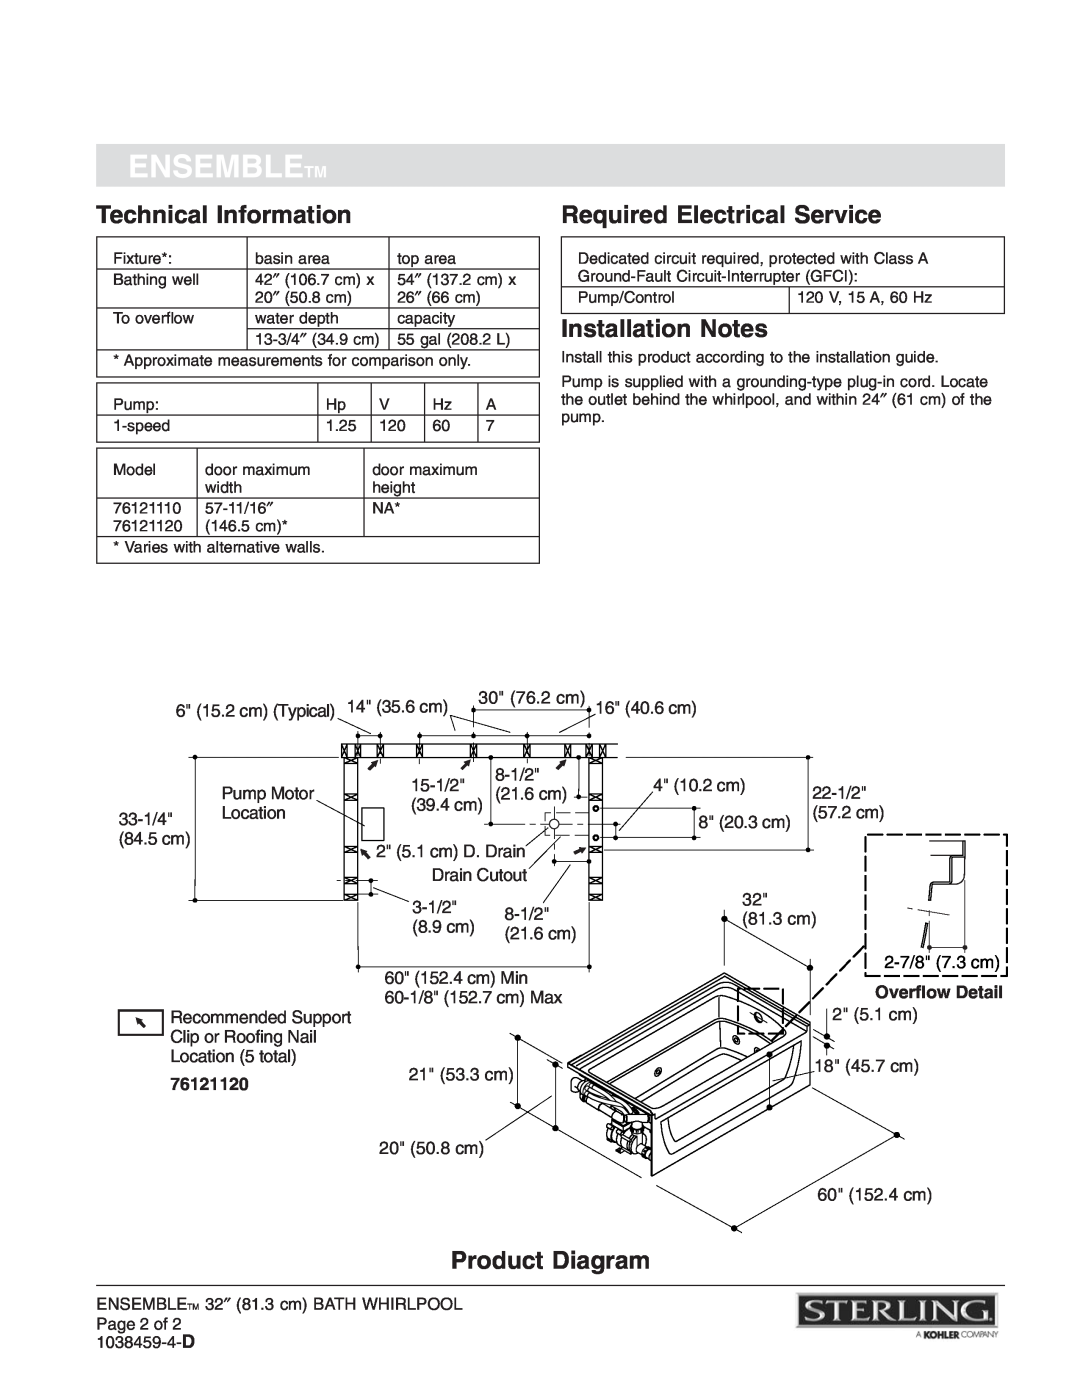 Sterling Plumbing 76121120 warranty Technical Information, Required Electrical Service, Installation Notes, Product Diagram 